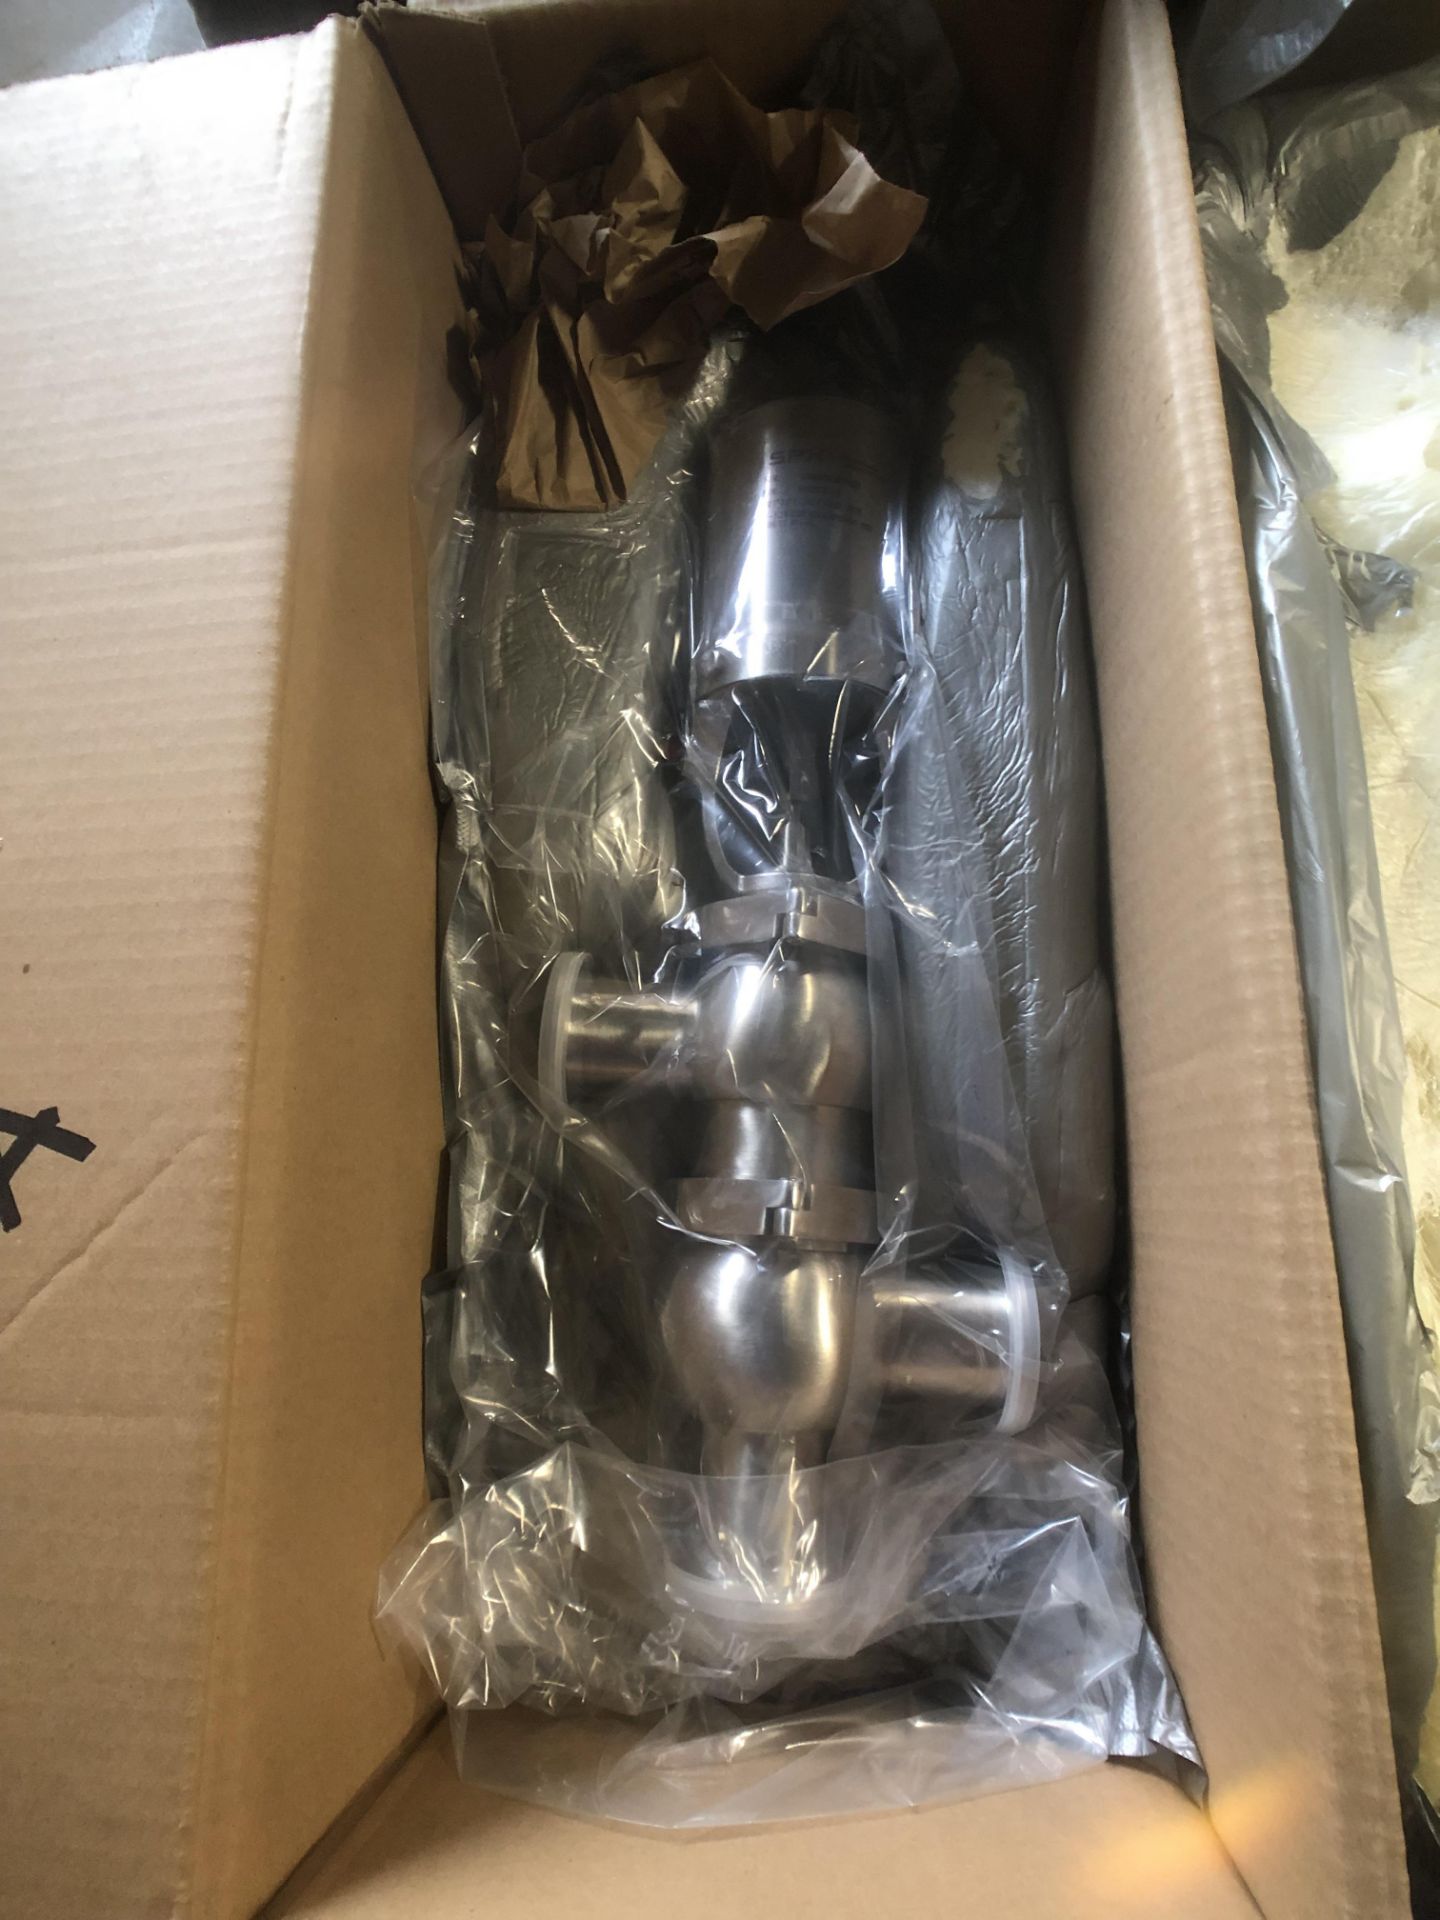 NEW SPX 761Series 2" Double Seated Air Valve, S/N 1000003050206, TEF-Flow Stem - Image 3 of 3